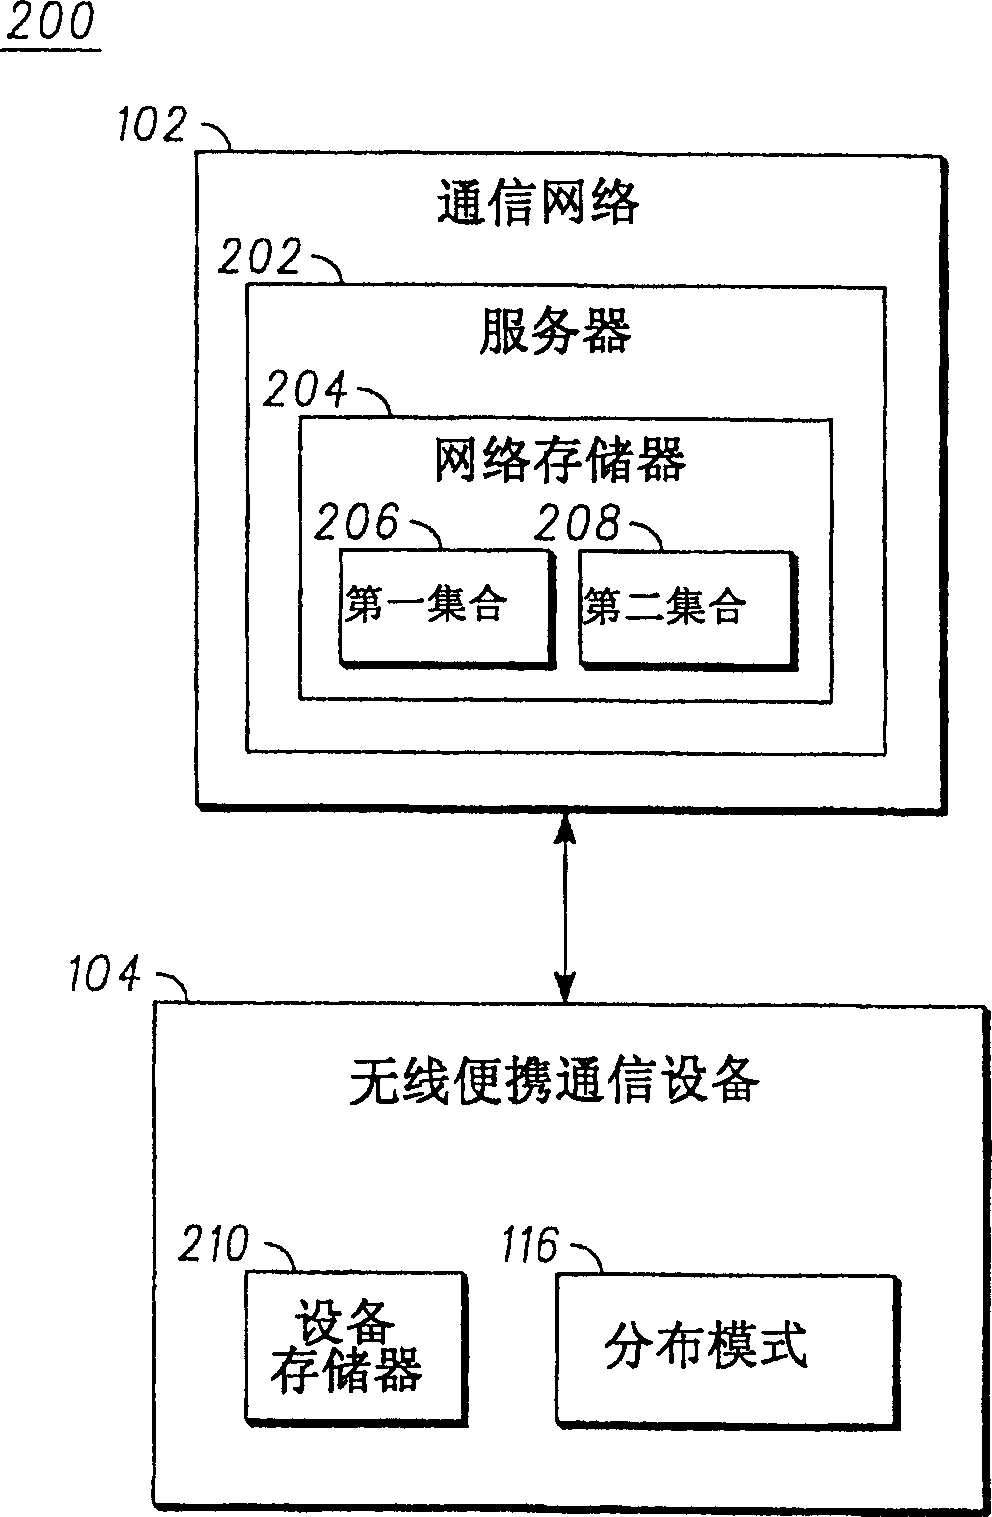 Over-the-air programming method for wireless communication device